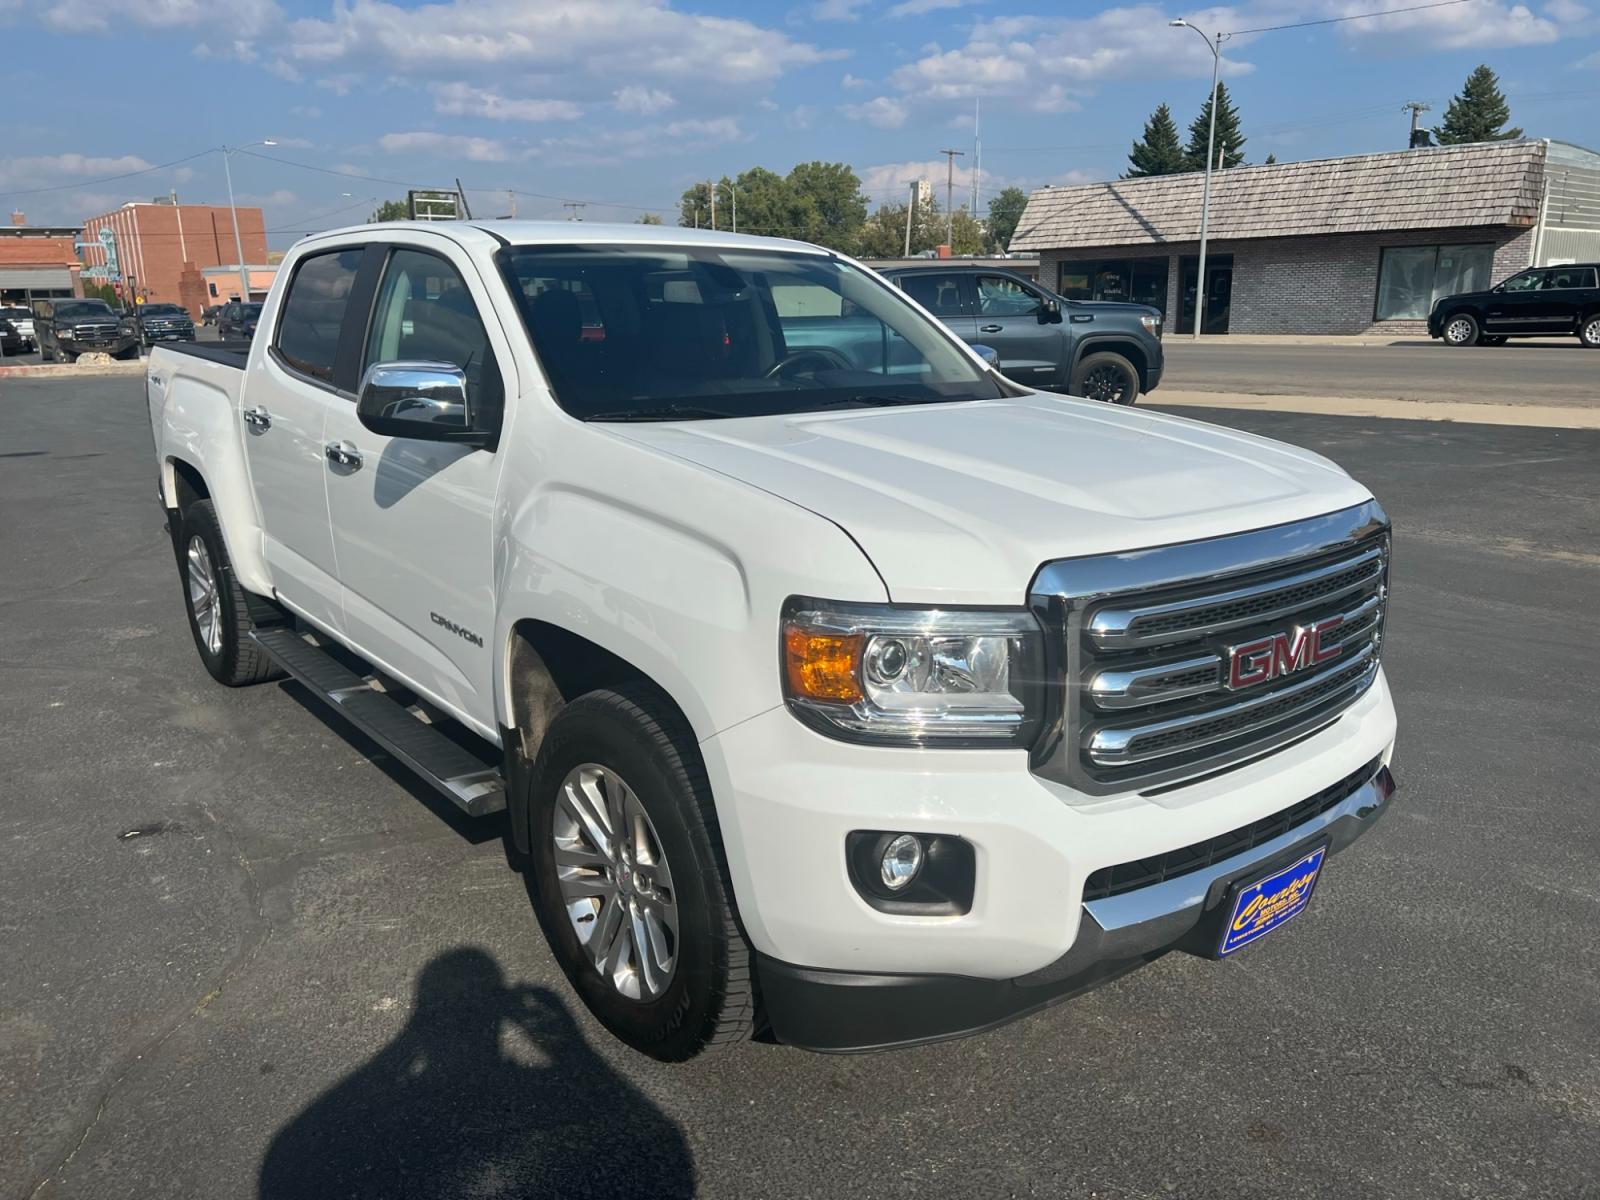 2020 WHITE /Black GMC Canyon SLT Crew Cab 4WD Short Box (1GTG6DEN8L1) with an 3.6L V6 DOHC 24V engine, 6A transmission, located at 116 5th Avenue South, Lewistown, MT, 59457, 47.063877, -109.427879 - Discover the Perfect Blend of Style and Capability - Pre-Owned 2020 GMC Canyon Crew Cab SLT 4WD! Key Features: 2020 Model Year Crew Cab Configuration SLT Trim for Premium Comfort 4WD for All-Terrain Adventures Reliable GMC Engineering Low Mileage Well-Maintained Pre-Owned Vehicle About - Photo #0